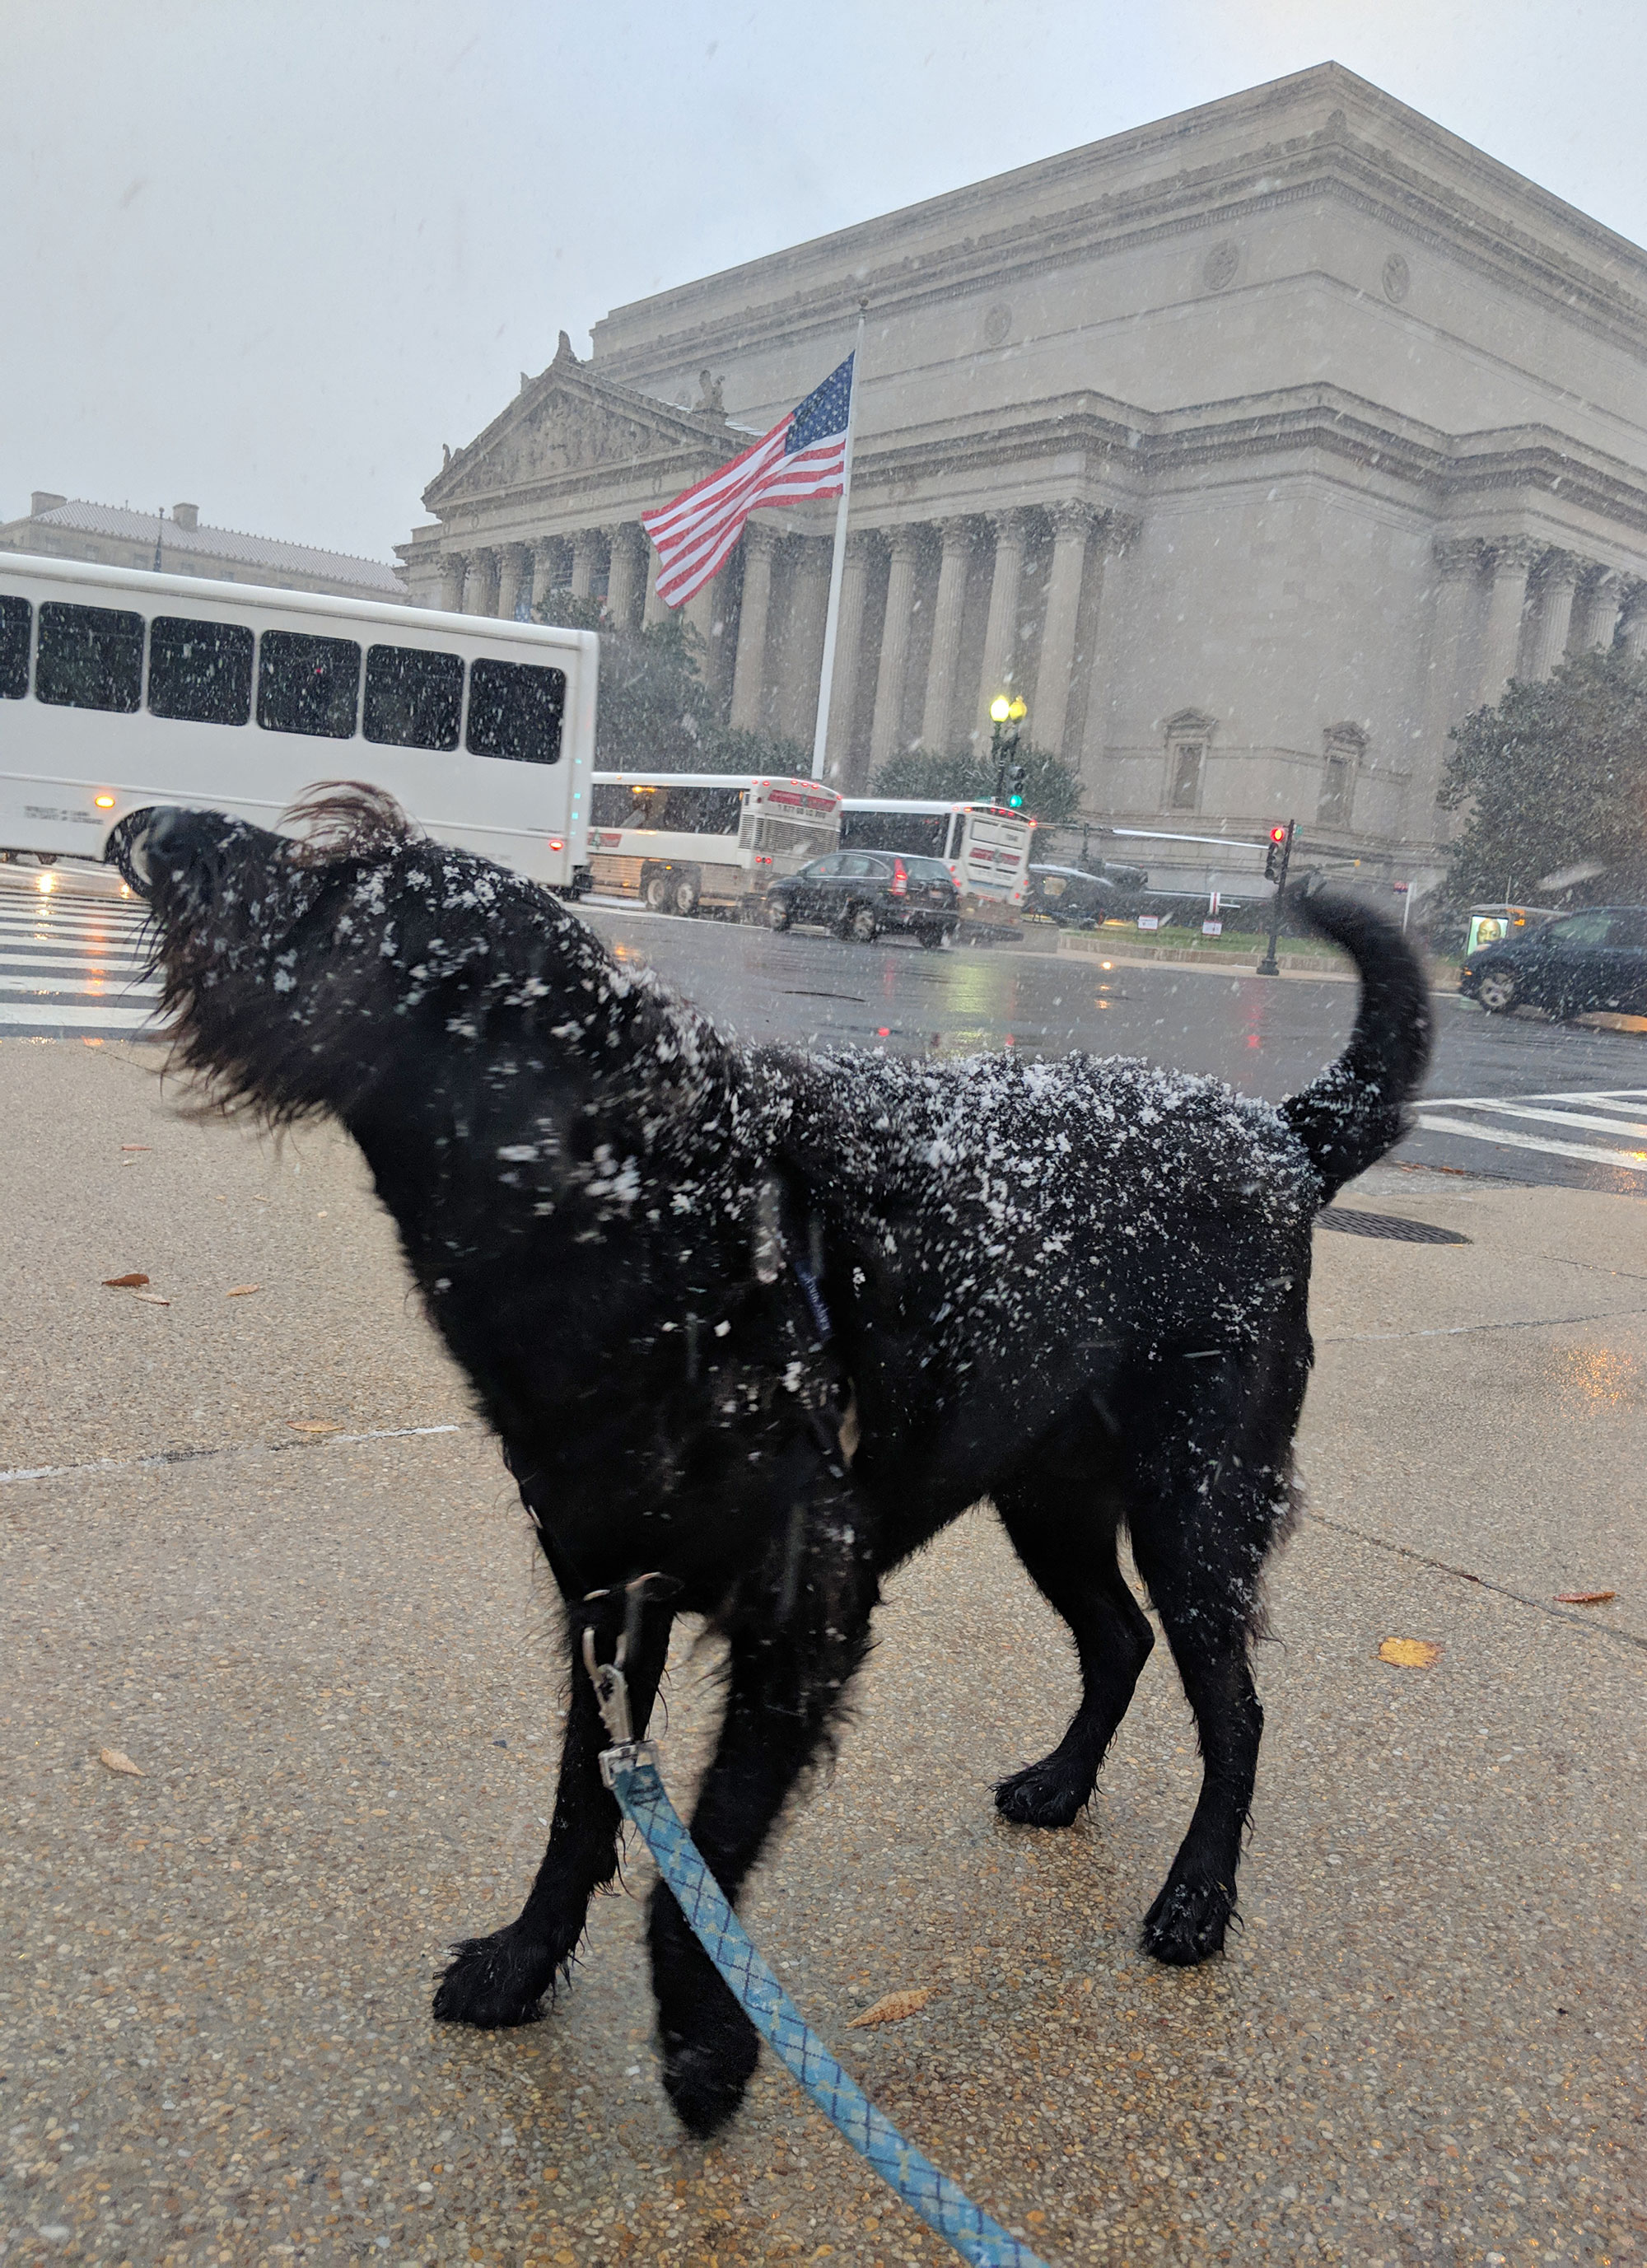 Ingrid during a snow storm by the National Archives building in Washington D.C.